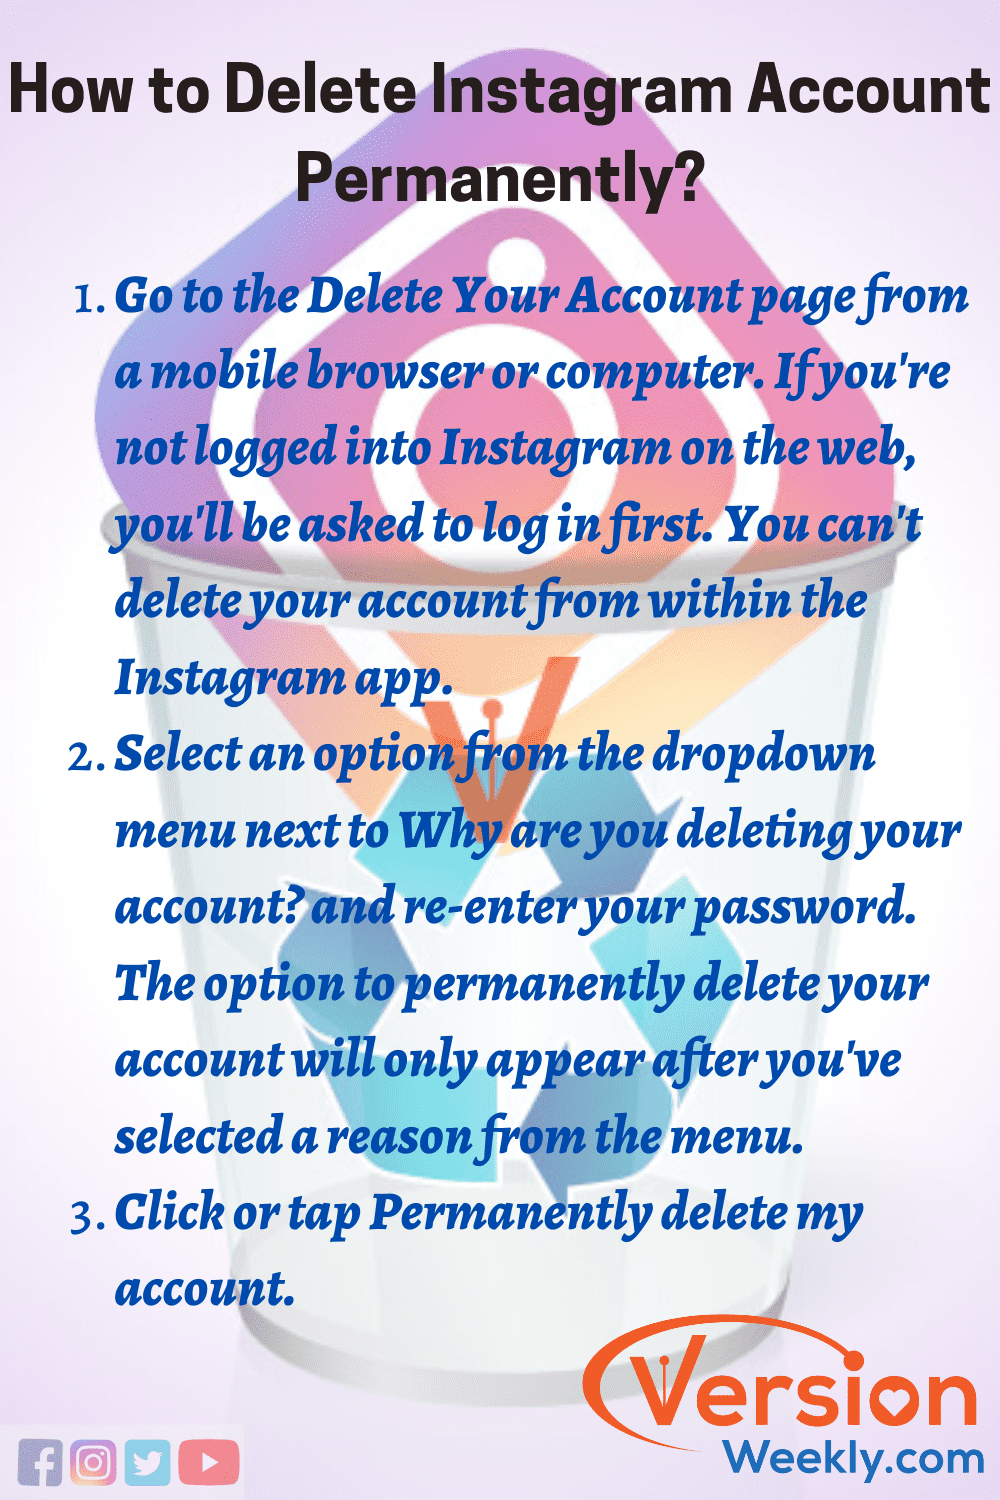 How to delete IG account Permanently